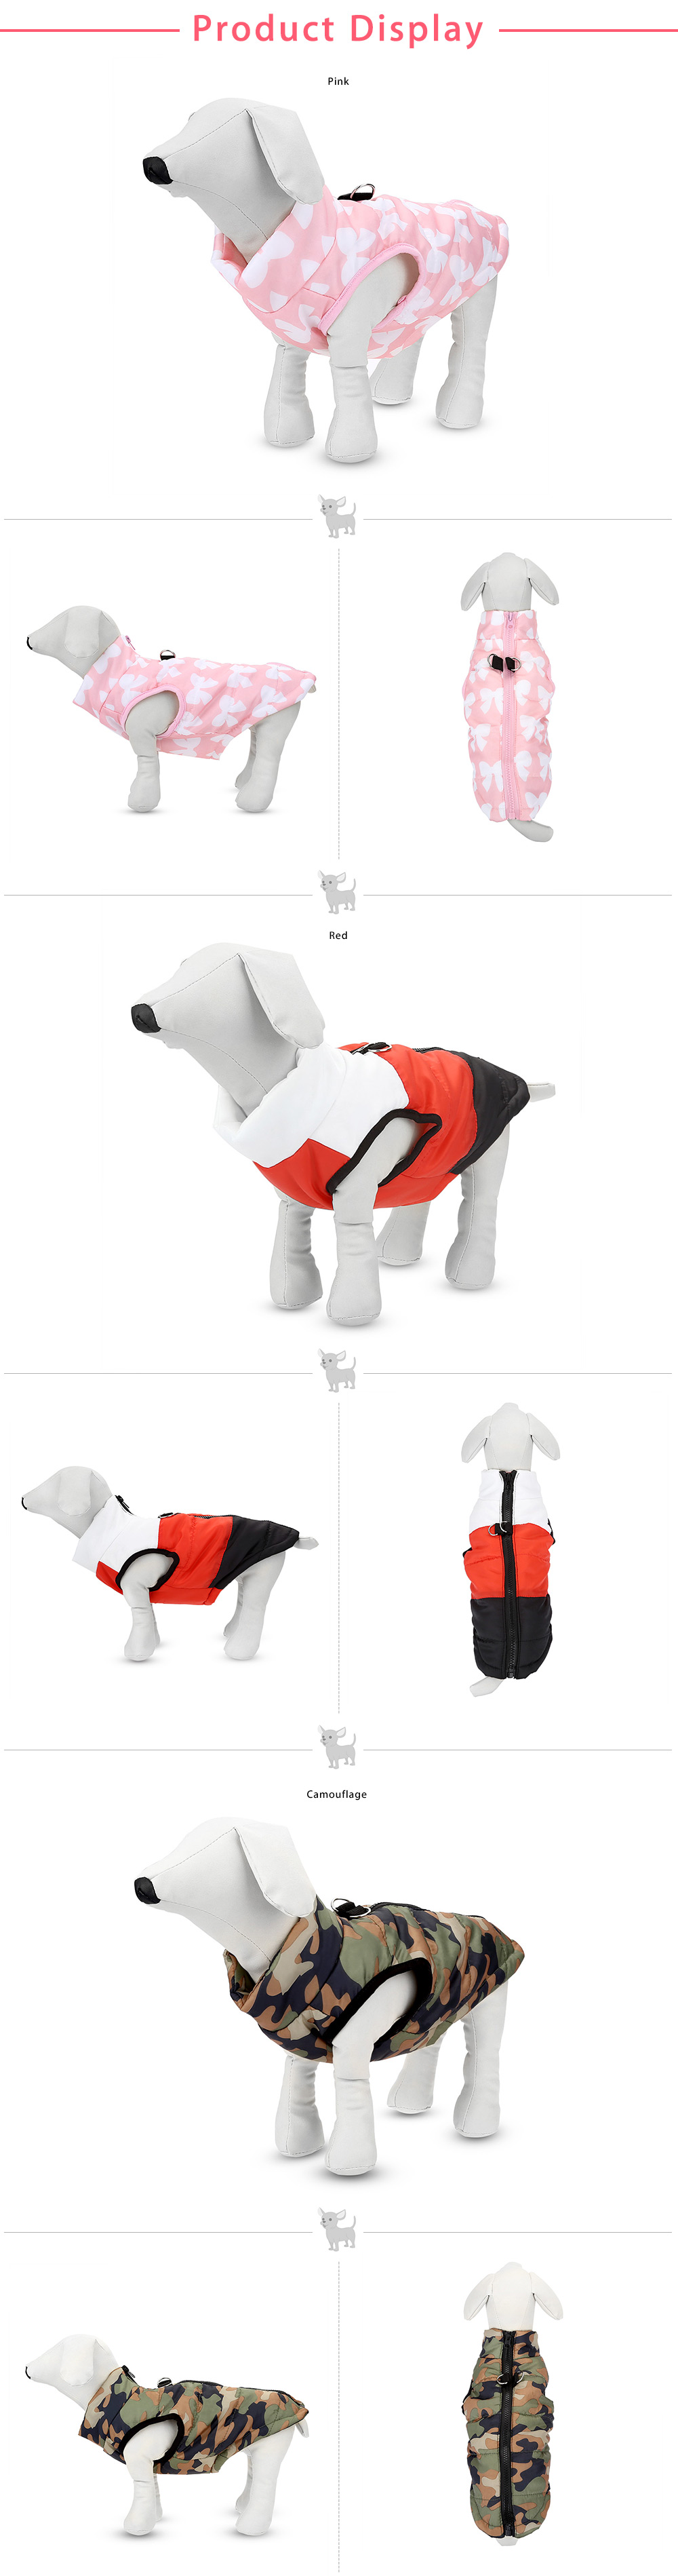 Pet Dog Winter Warm Clothes Teddy Hoodie Coat Cotton-padded Jacket Costume